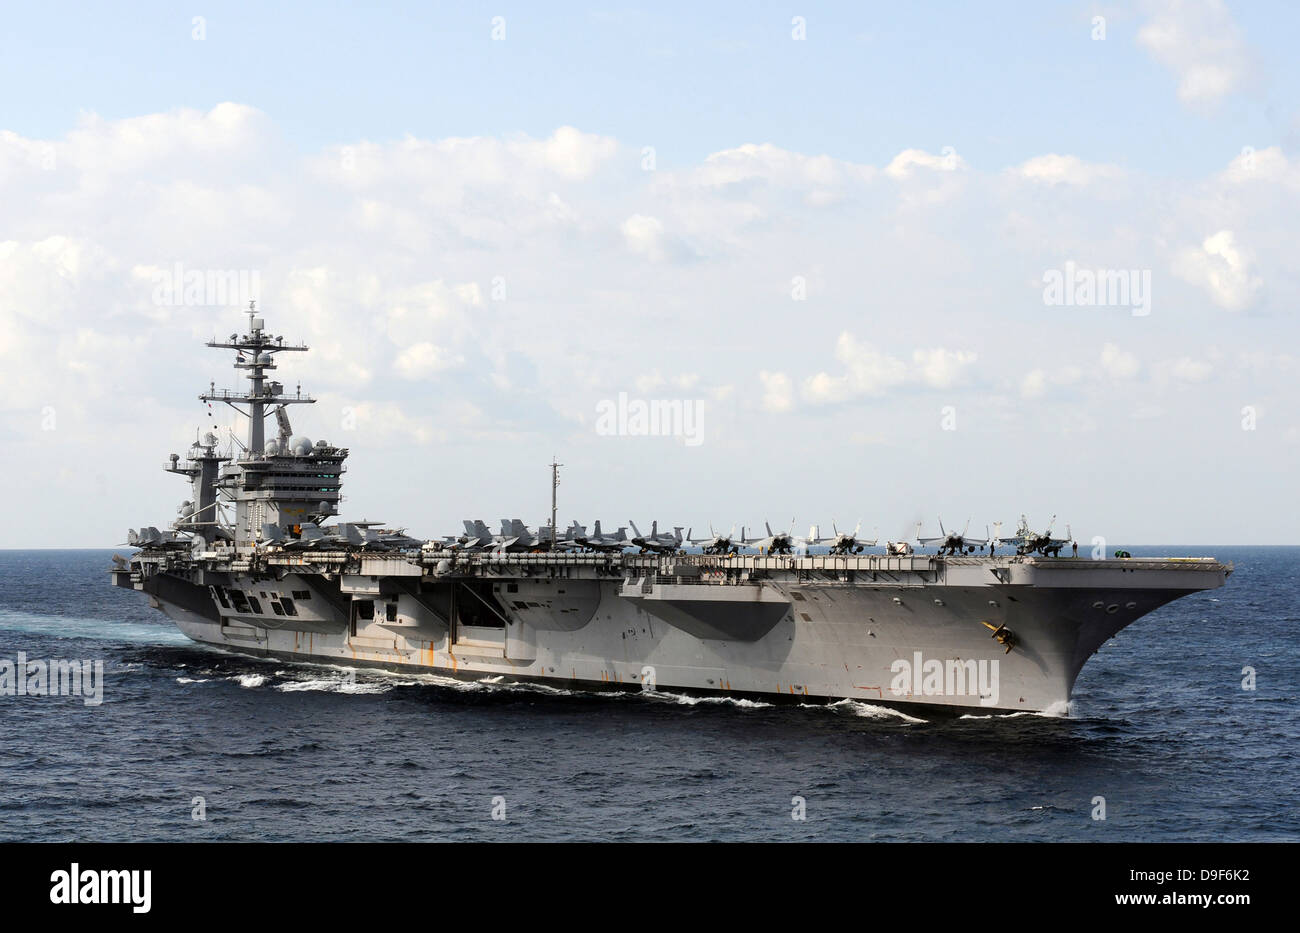 January 21, 2012 - The Nimitz-class aircraft carrier USS Carl Vinson is underway in the Arabian Sea. Stock Photo